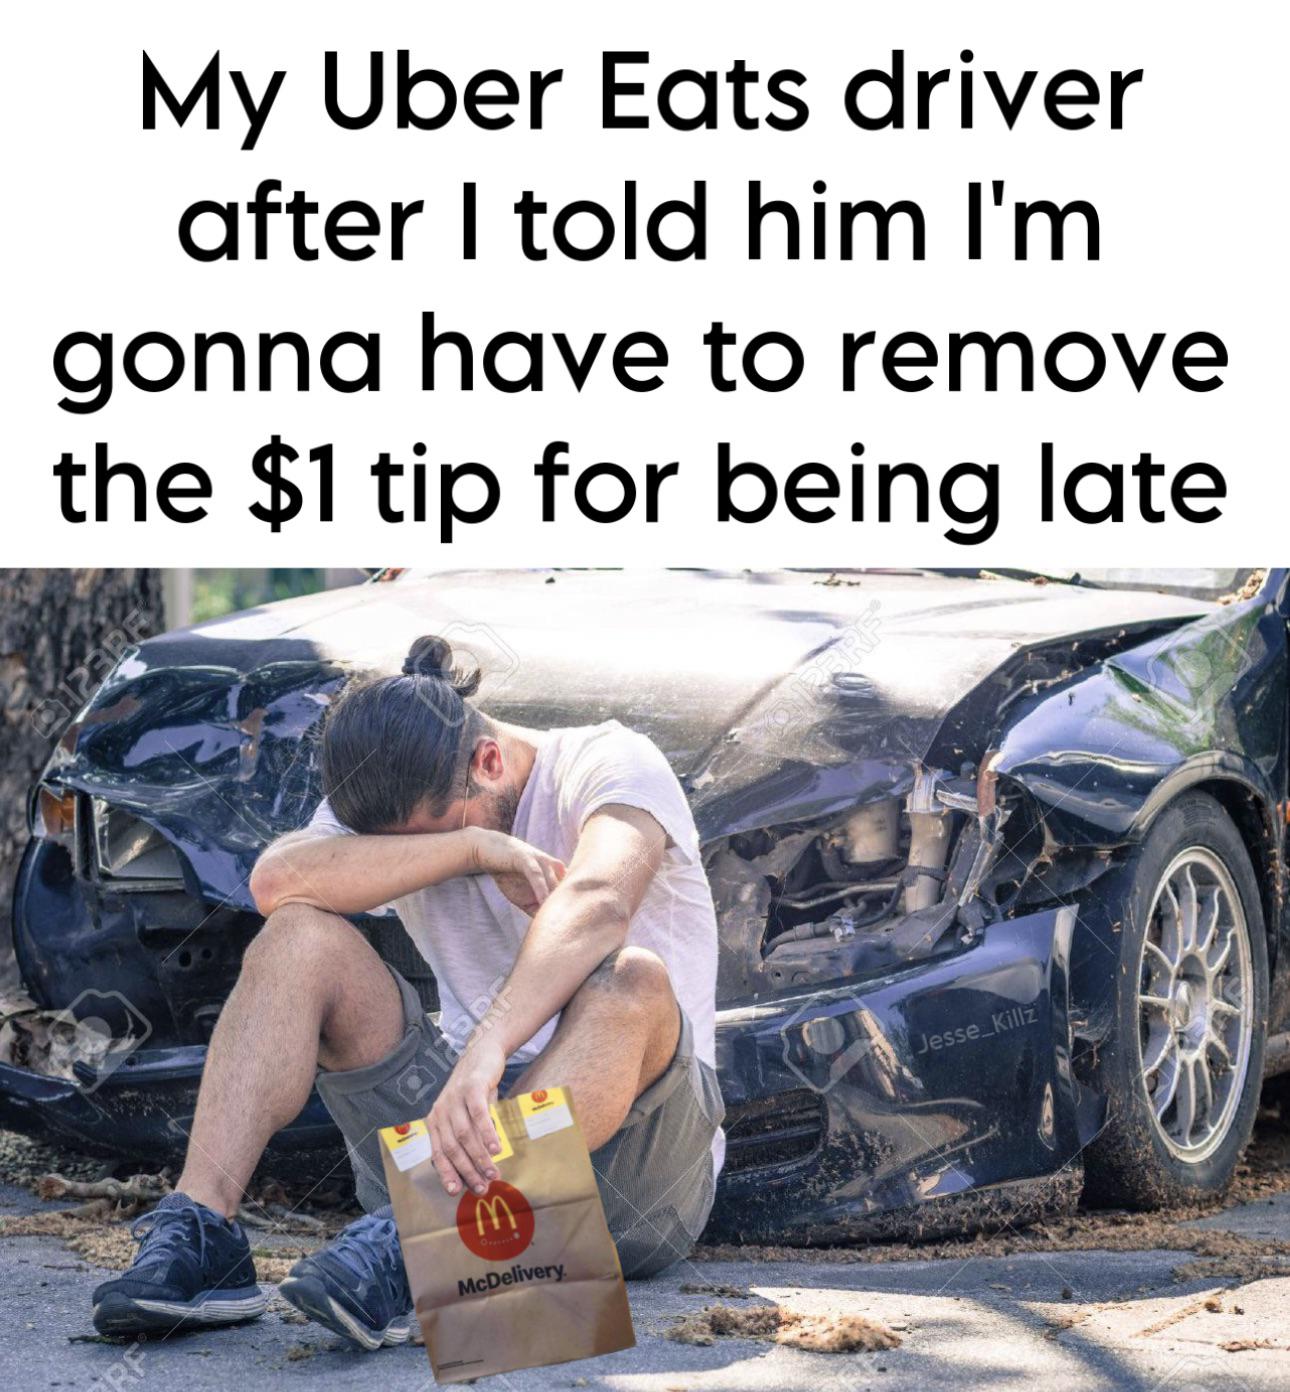 funny memes and pcis - survive car accident - My Uber Eats driver after I told him I'm gonna have to remove the $1 tip for being late 012388 M Of McDelivery. Rbre Jesse Killz